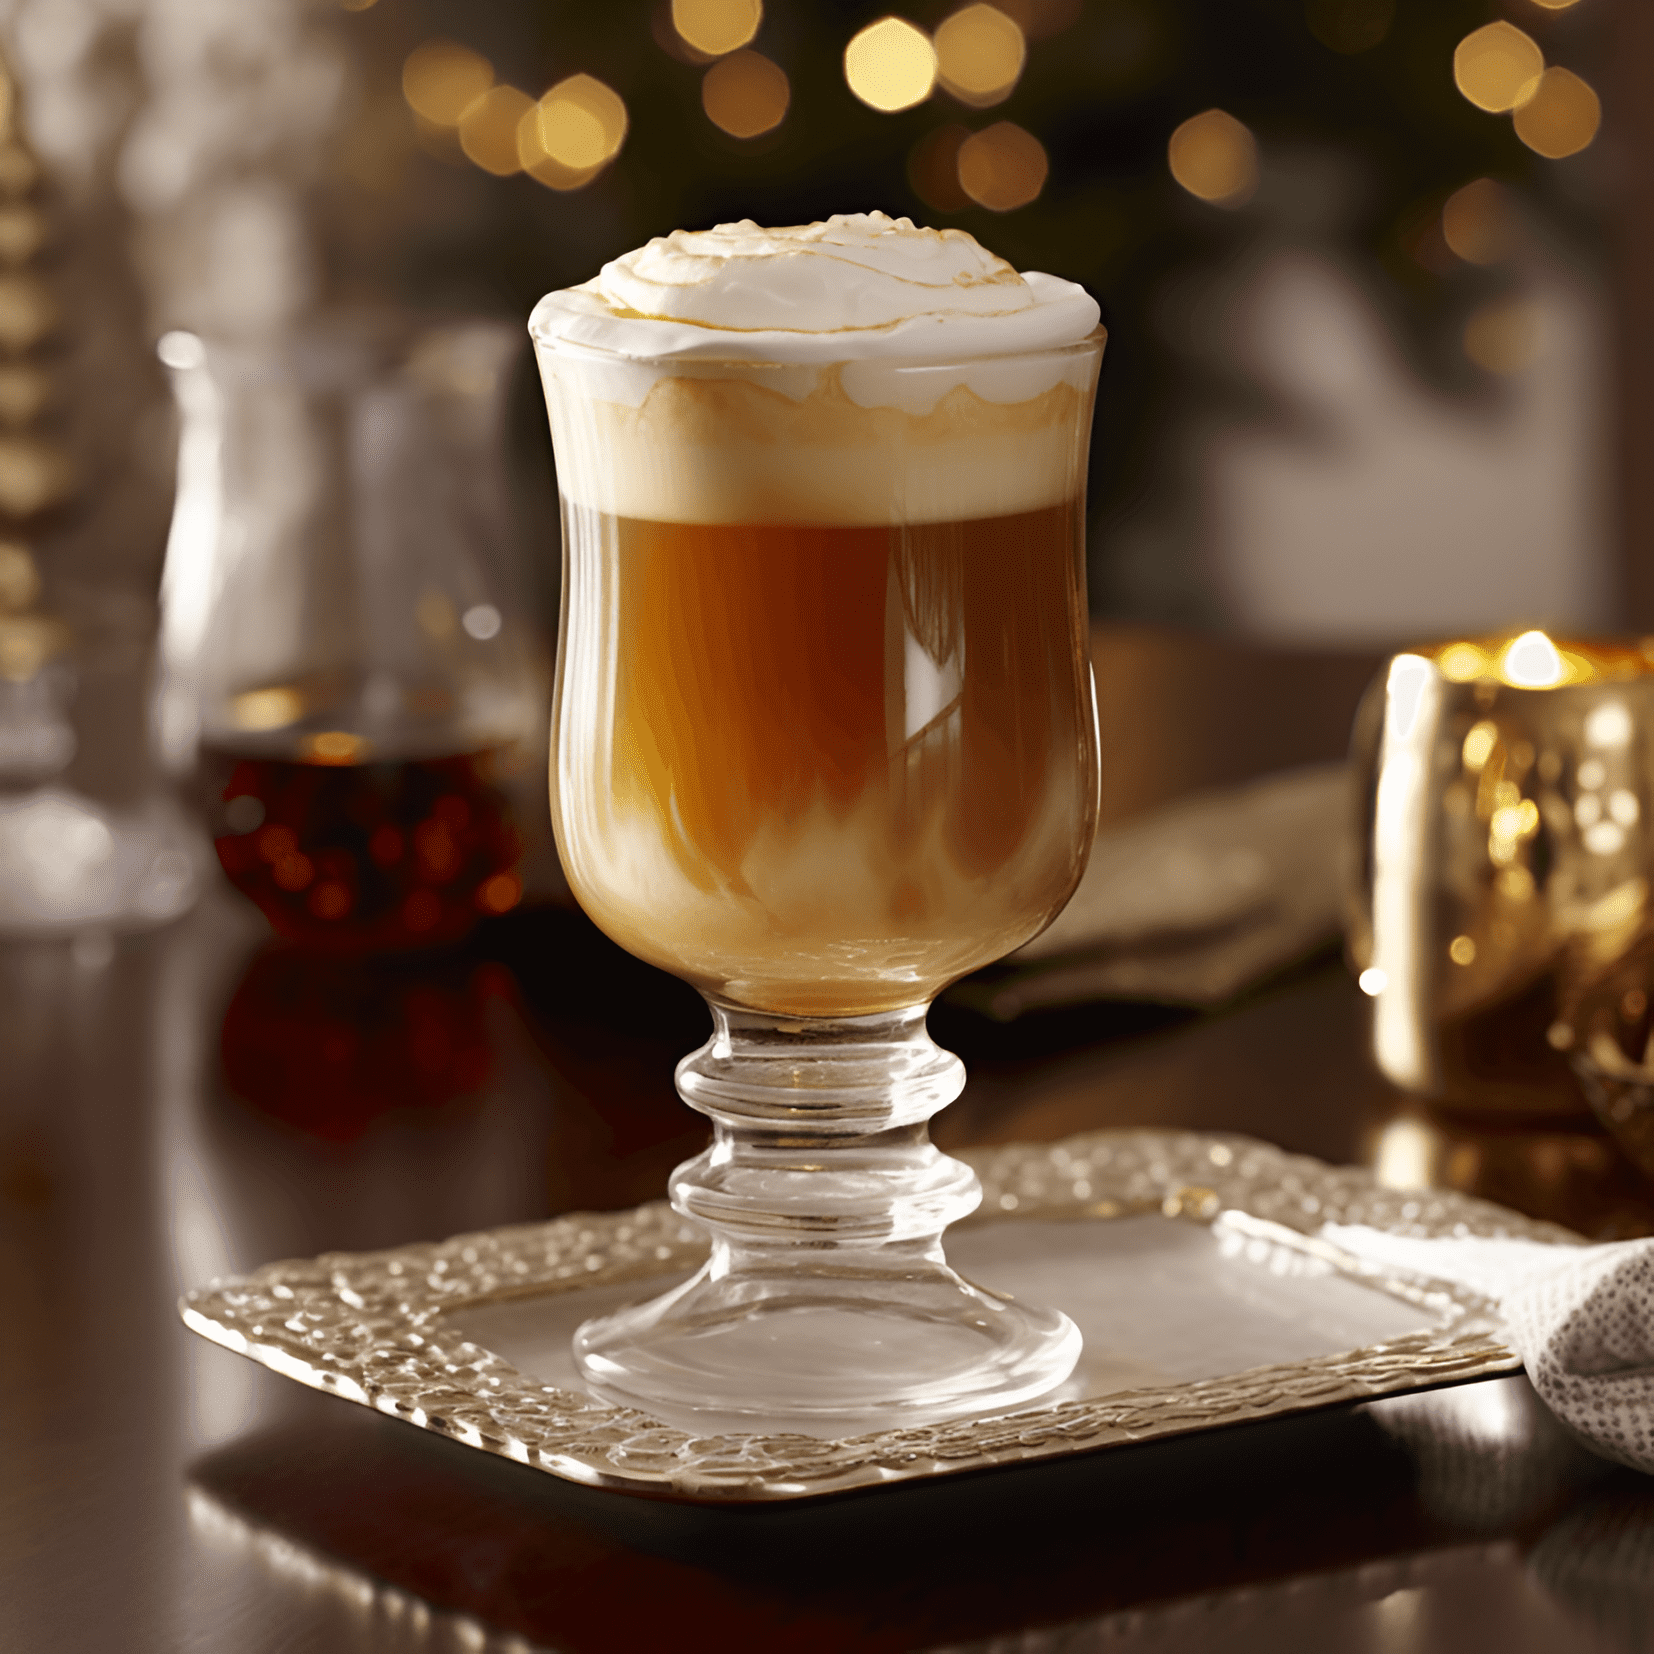 The Brandy Egg Nog cocktail is rich, creamy, and velvety with a perfect balance of sweetness and warmth from the brandy. The spices, such as nutmeg and cinnamon, add a subtle depth of flavor, making it a comforting and indulgent treat.